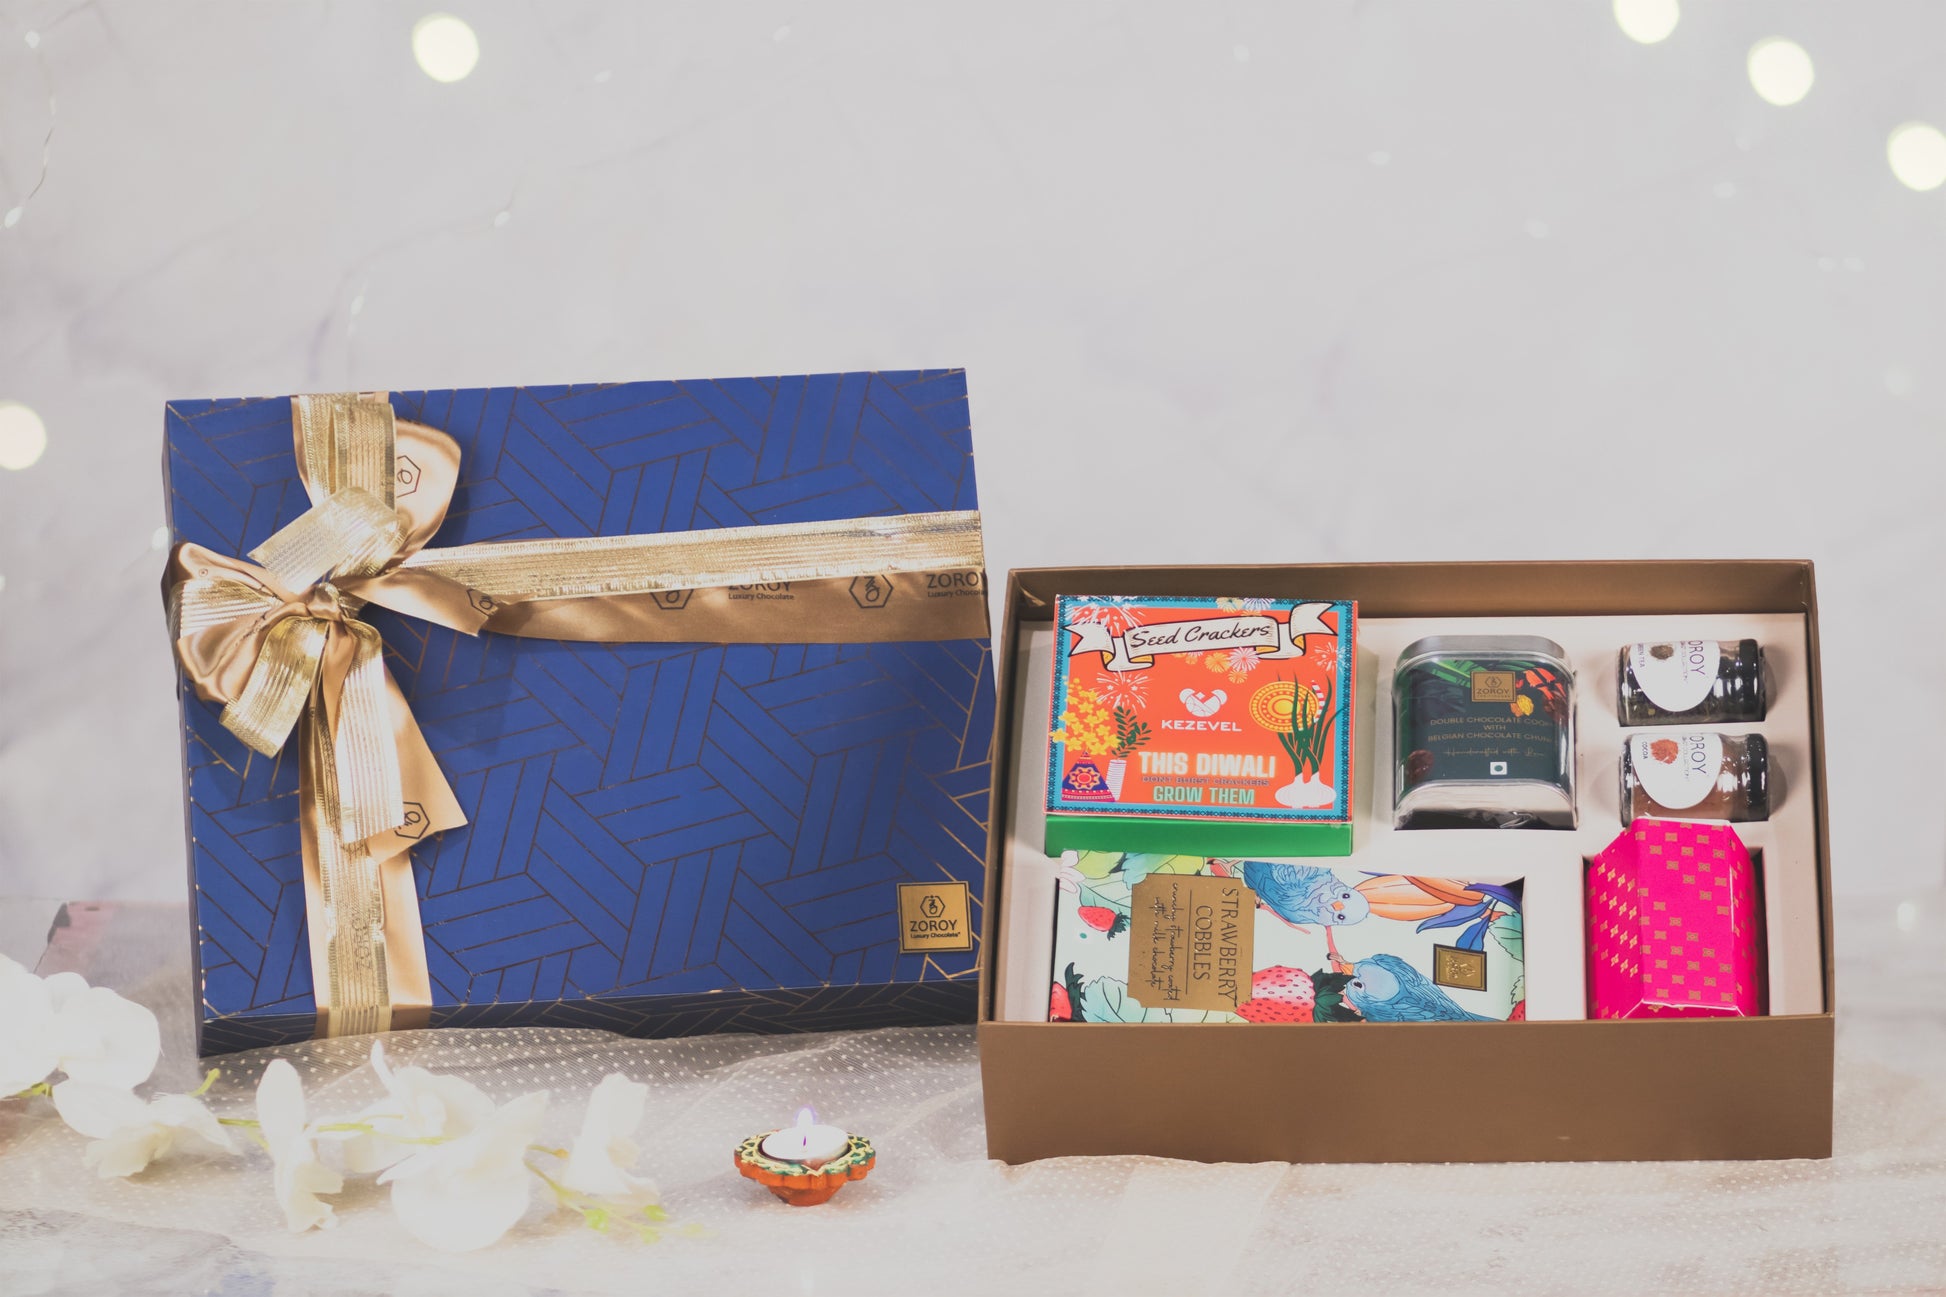 ZOROY Eco Friendly Diwali Seed Cracker Gift Box Hamper With Assorted Goodies Combo Pack